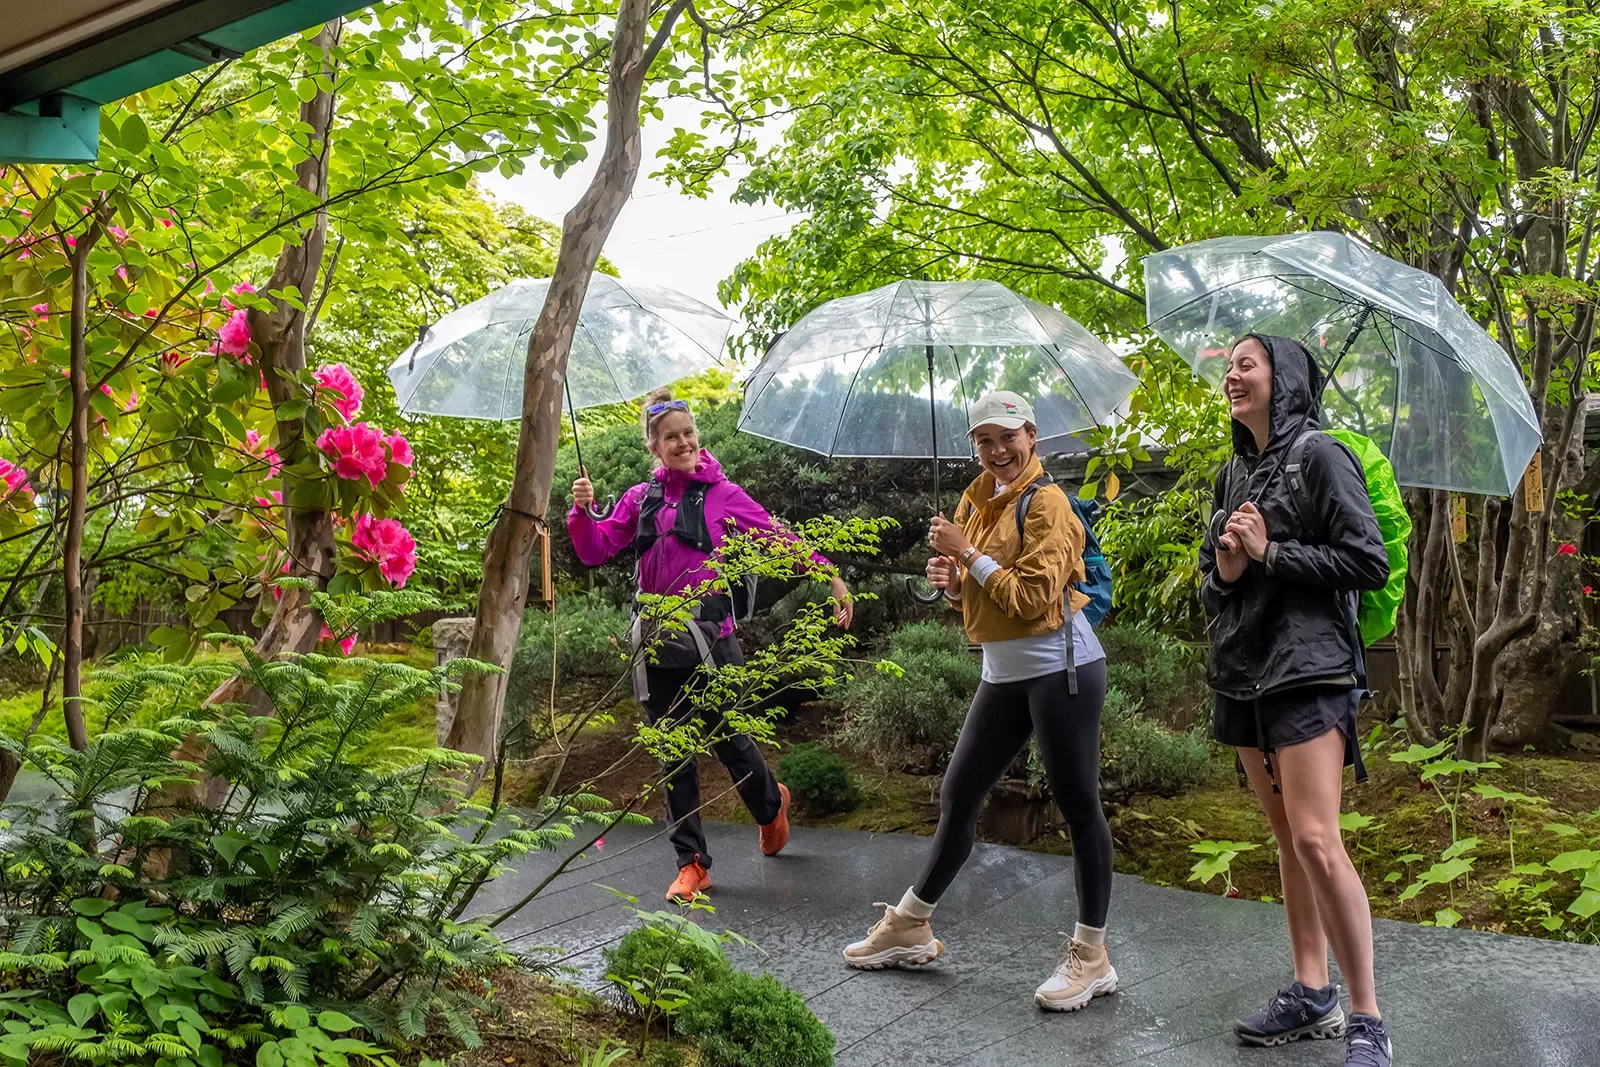 Backroads guests taking a walk in the rain in Japan holing clear umbrellas